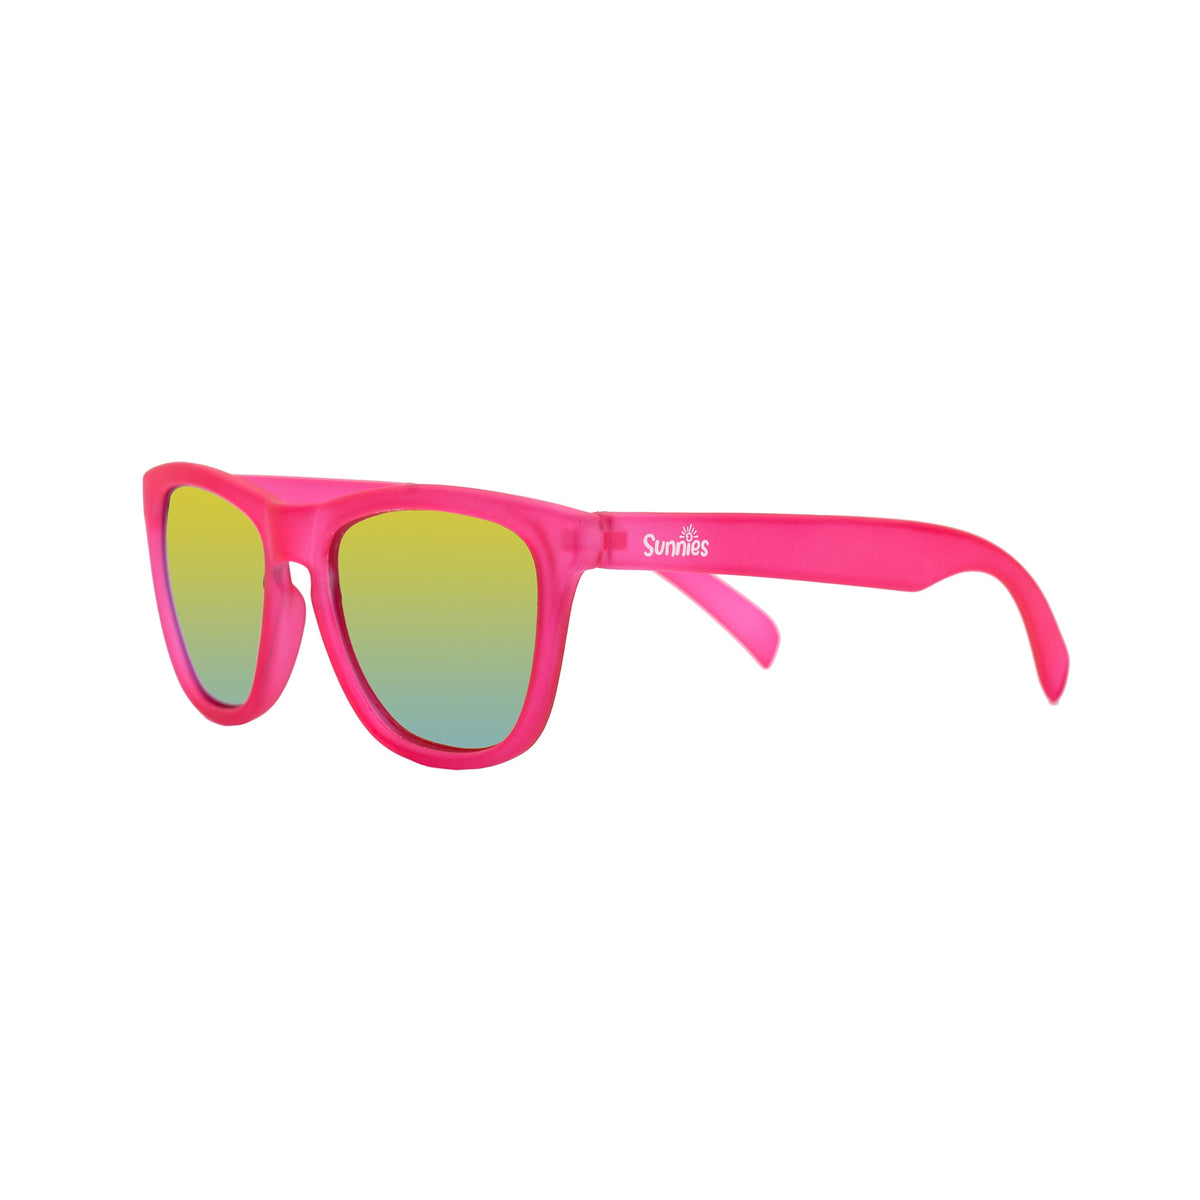 Kids pink sunglasses with reflective green polarized lenses